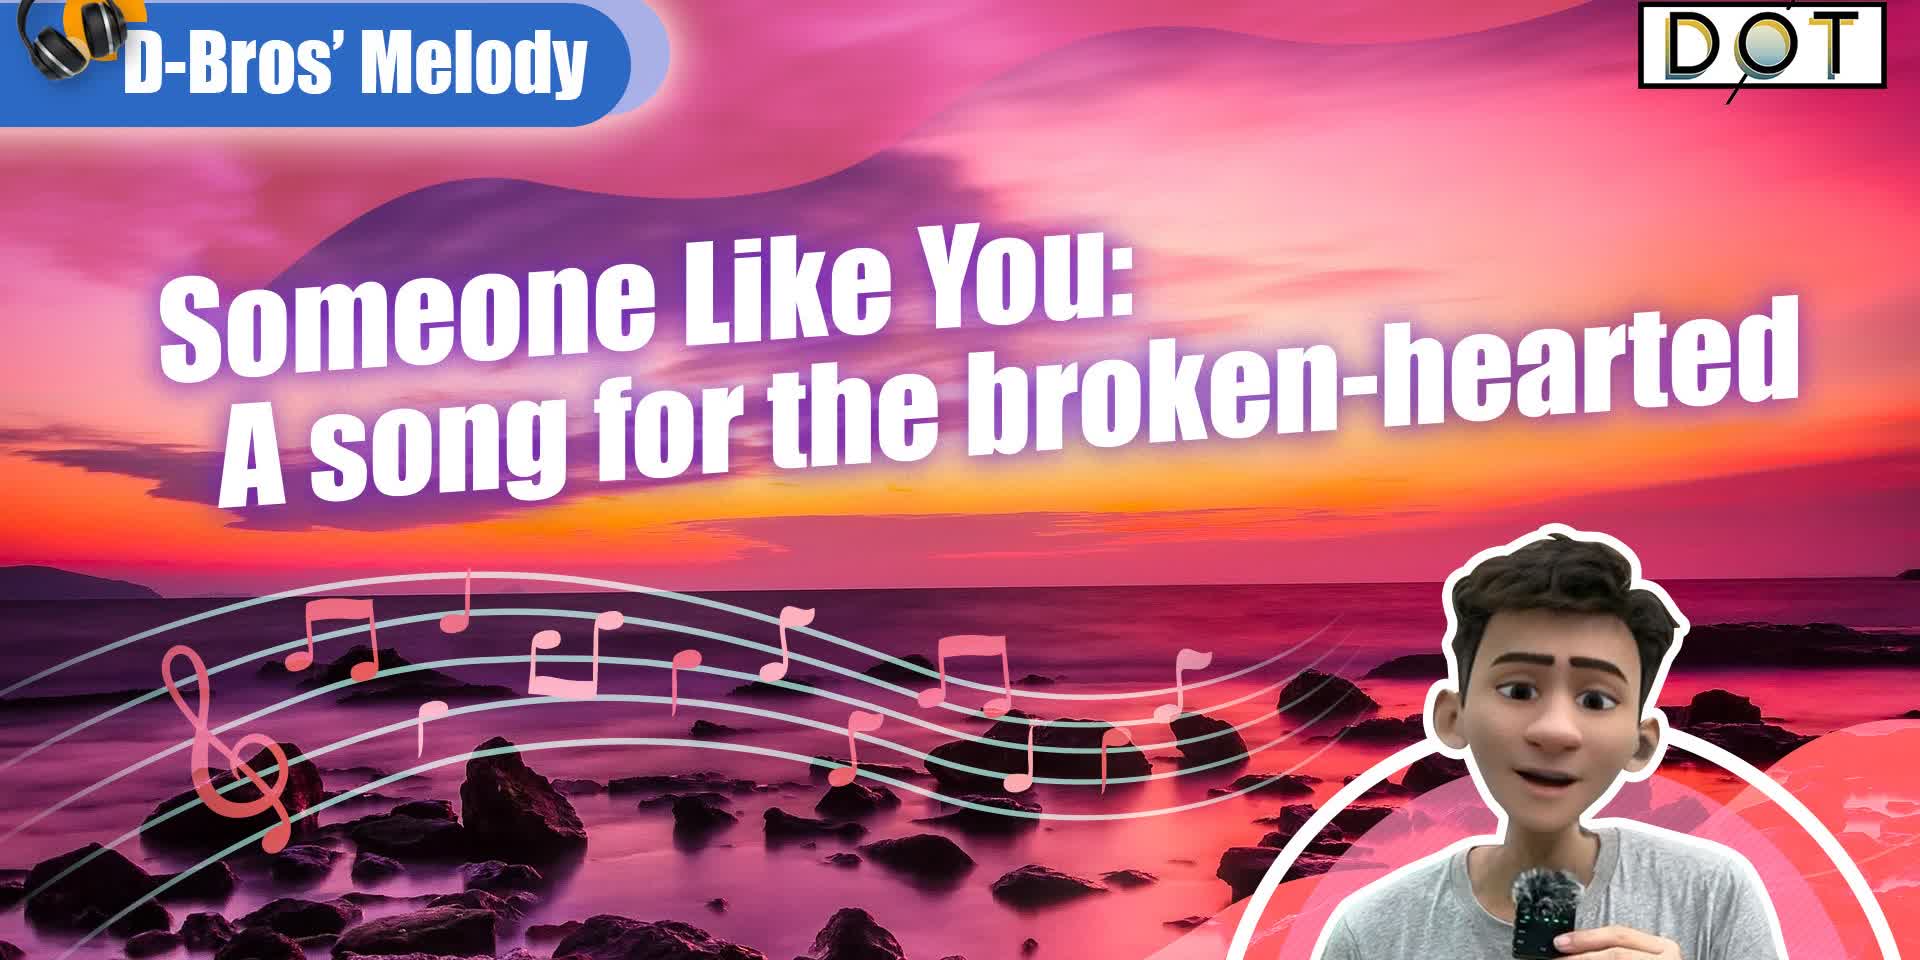 D-Bros' Melodies | Someone Like You: A song for the broken-hearted